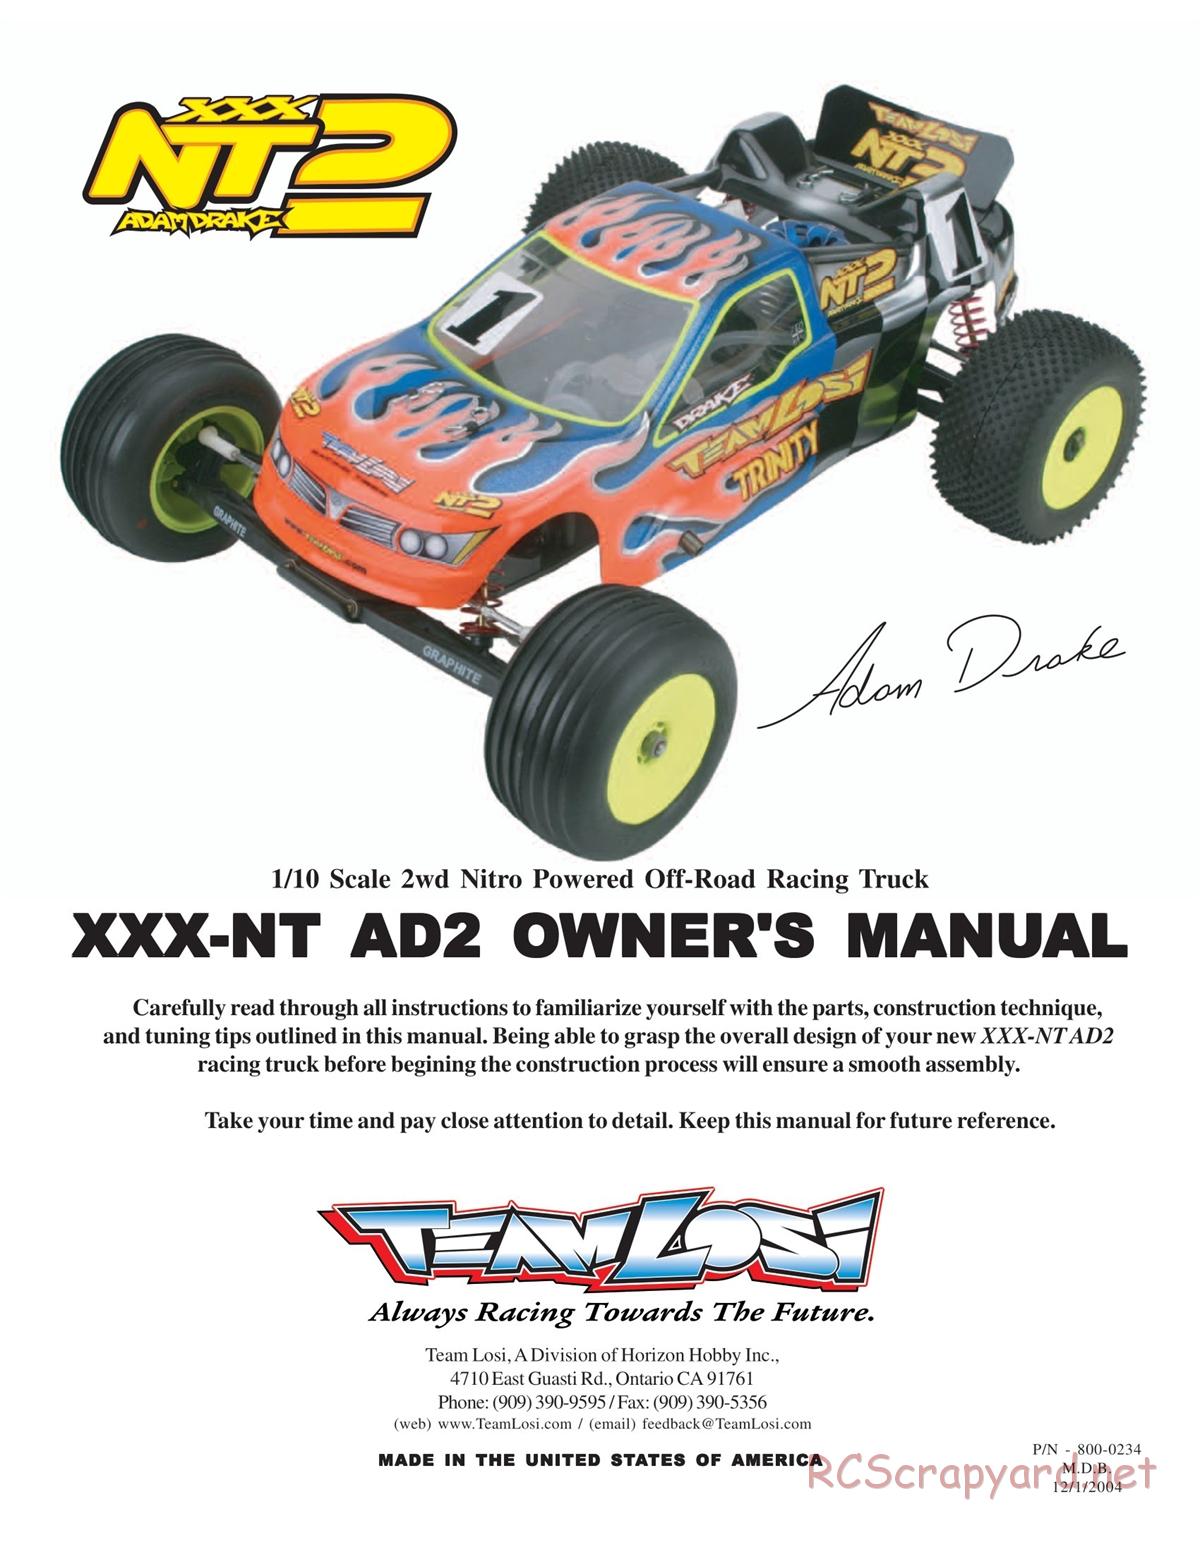 Team Losi - XXX NT AD2 - Manual - Page 1